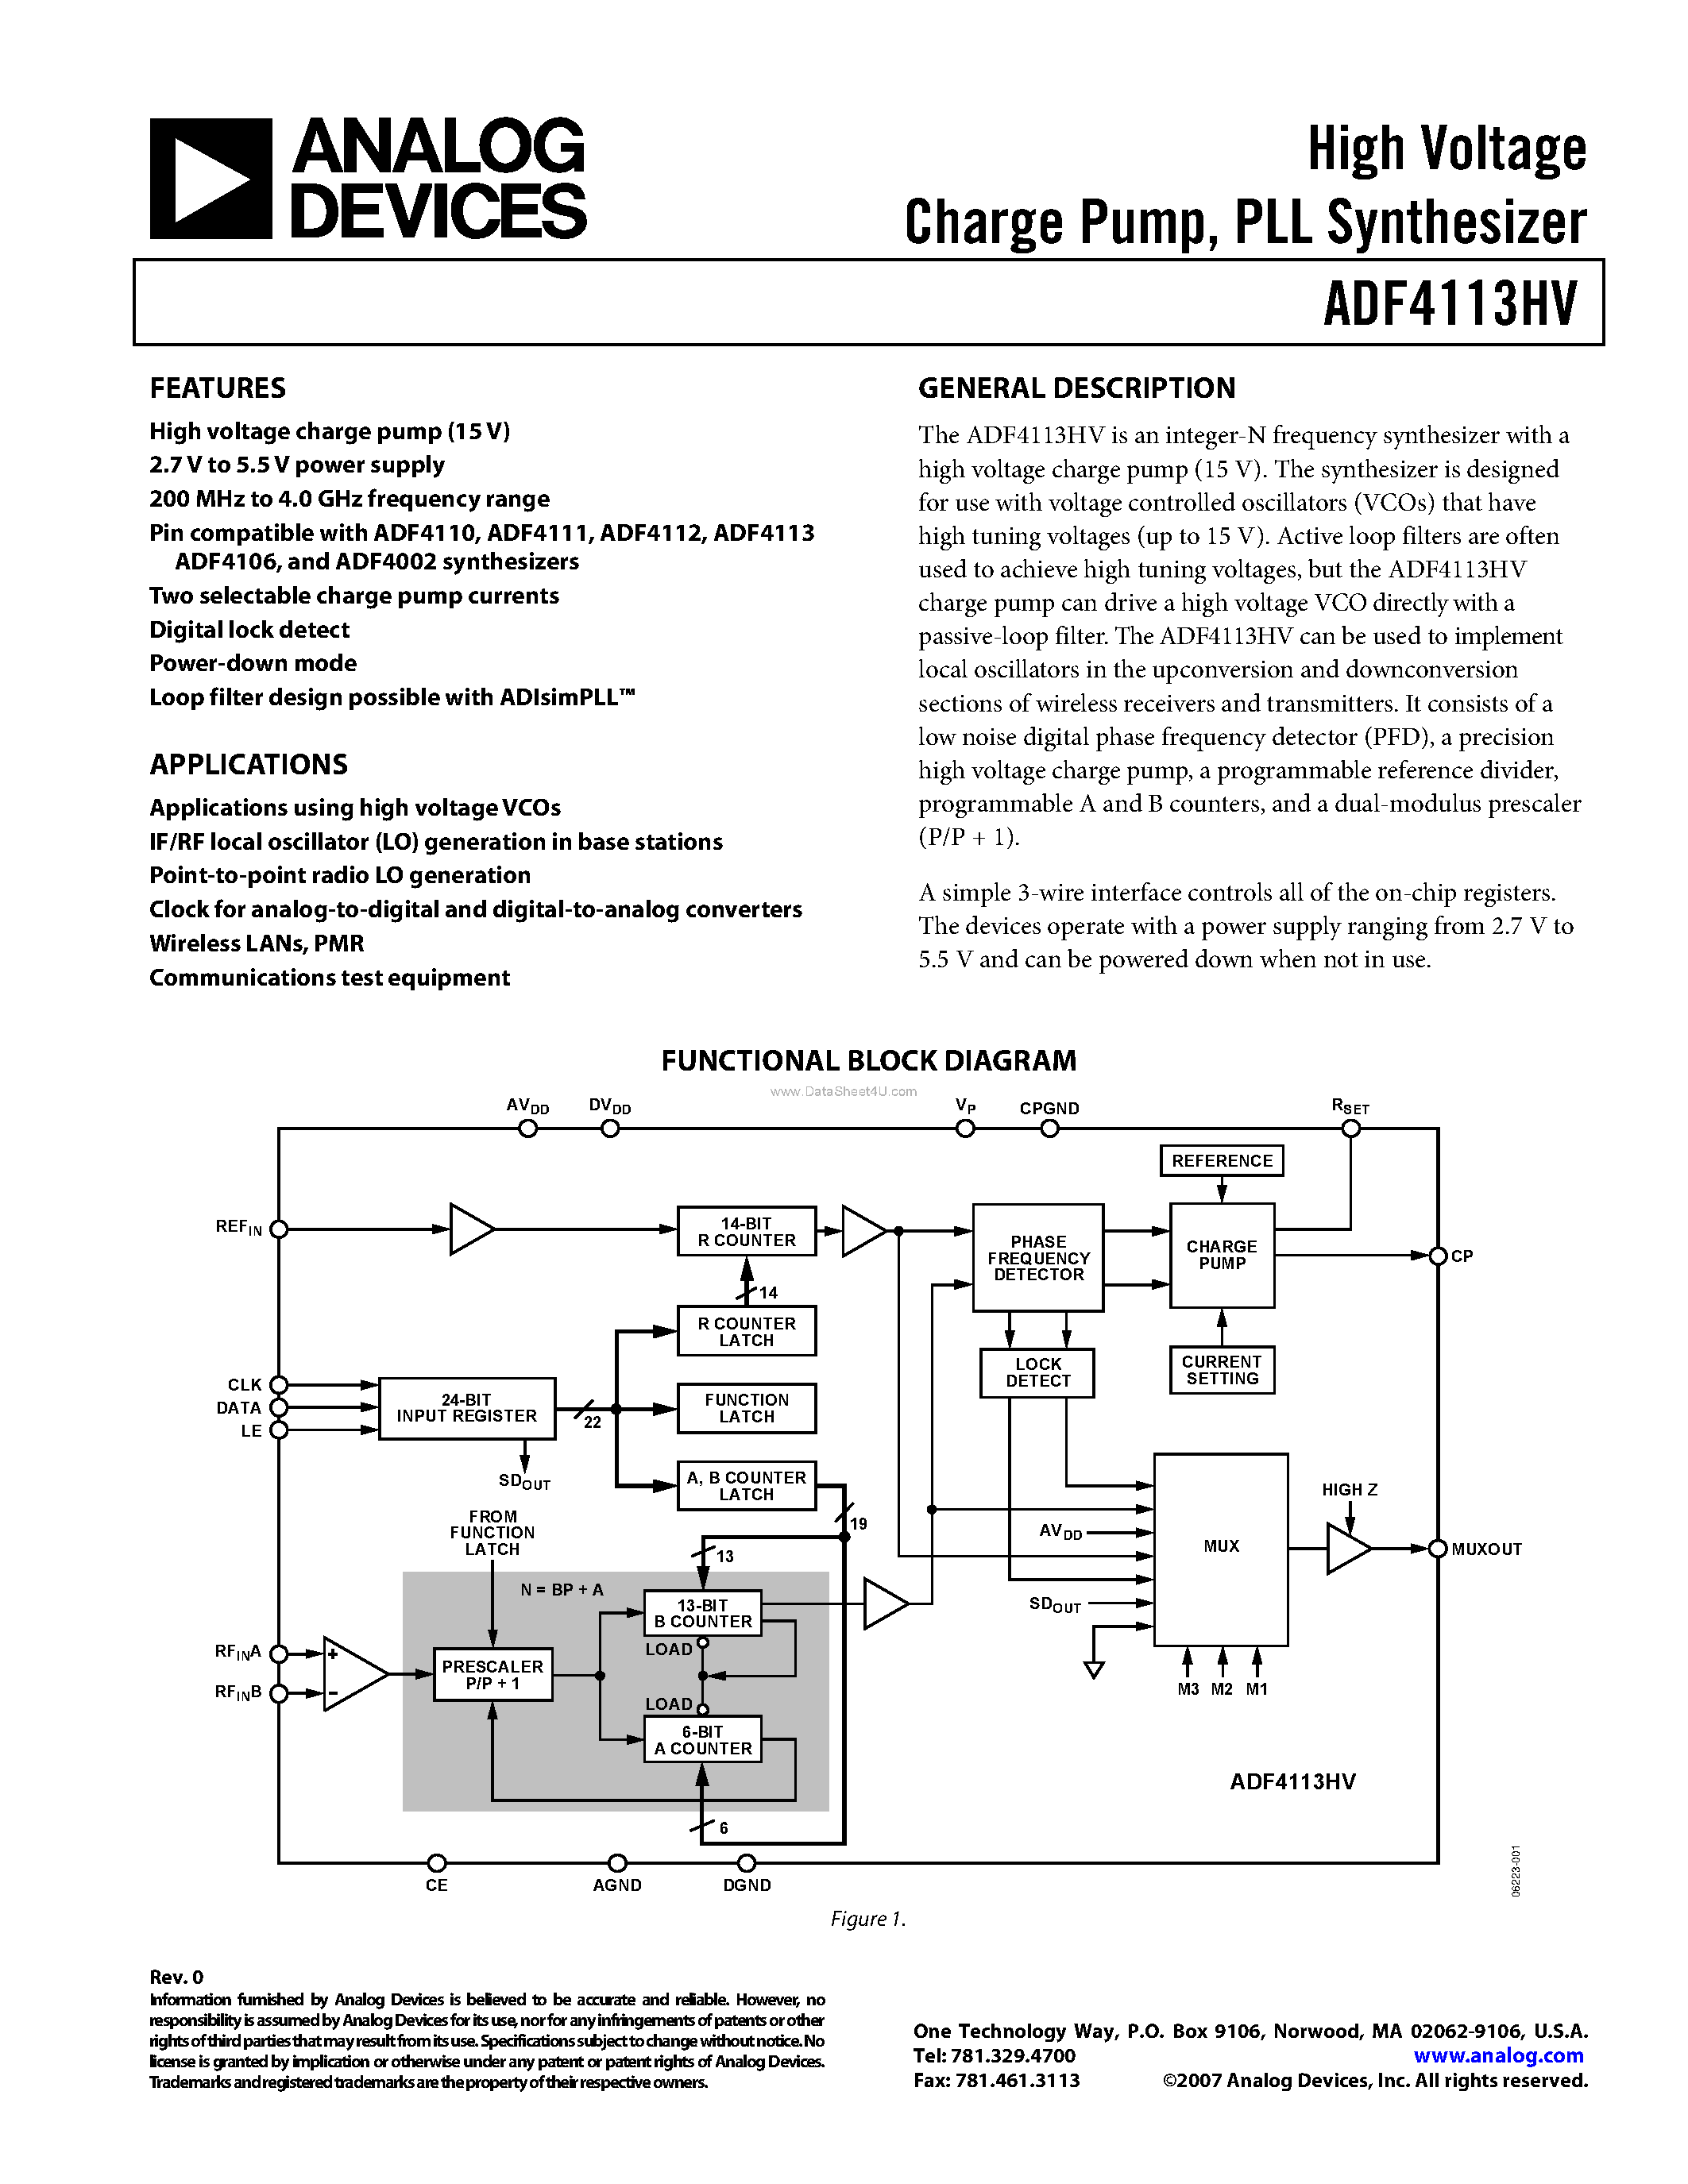 Даташит ADF4113HV - High Voltage Charge Pump / PLL Synthesizer страница 1